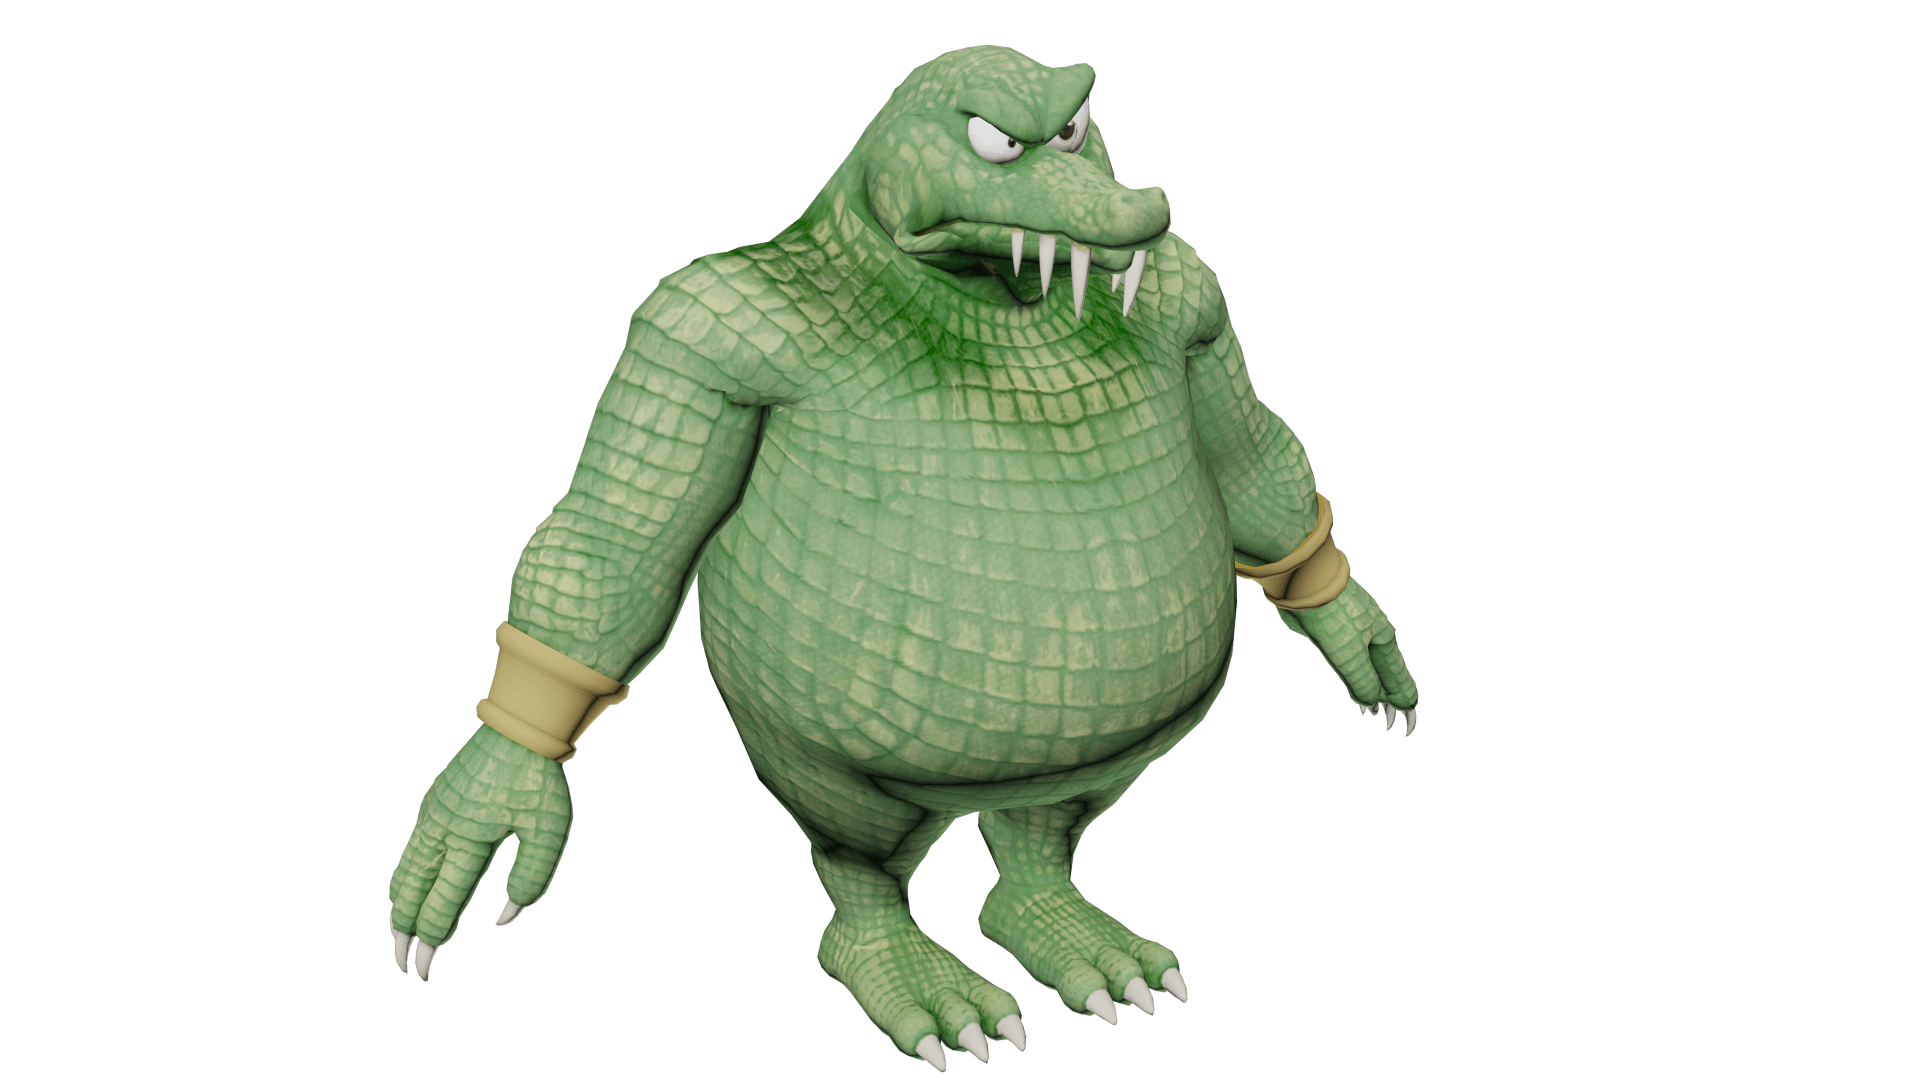 Just wanted to bless this sub with naked King K. Rool